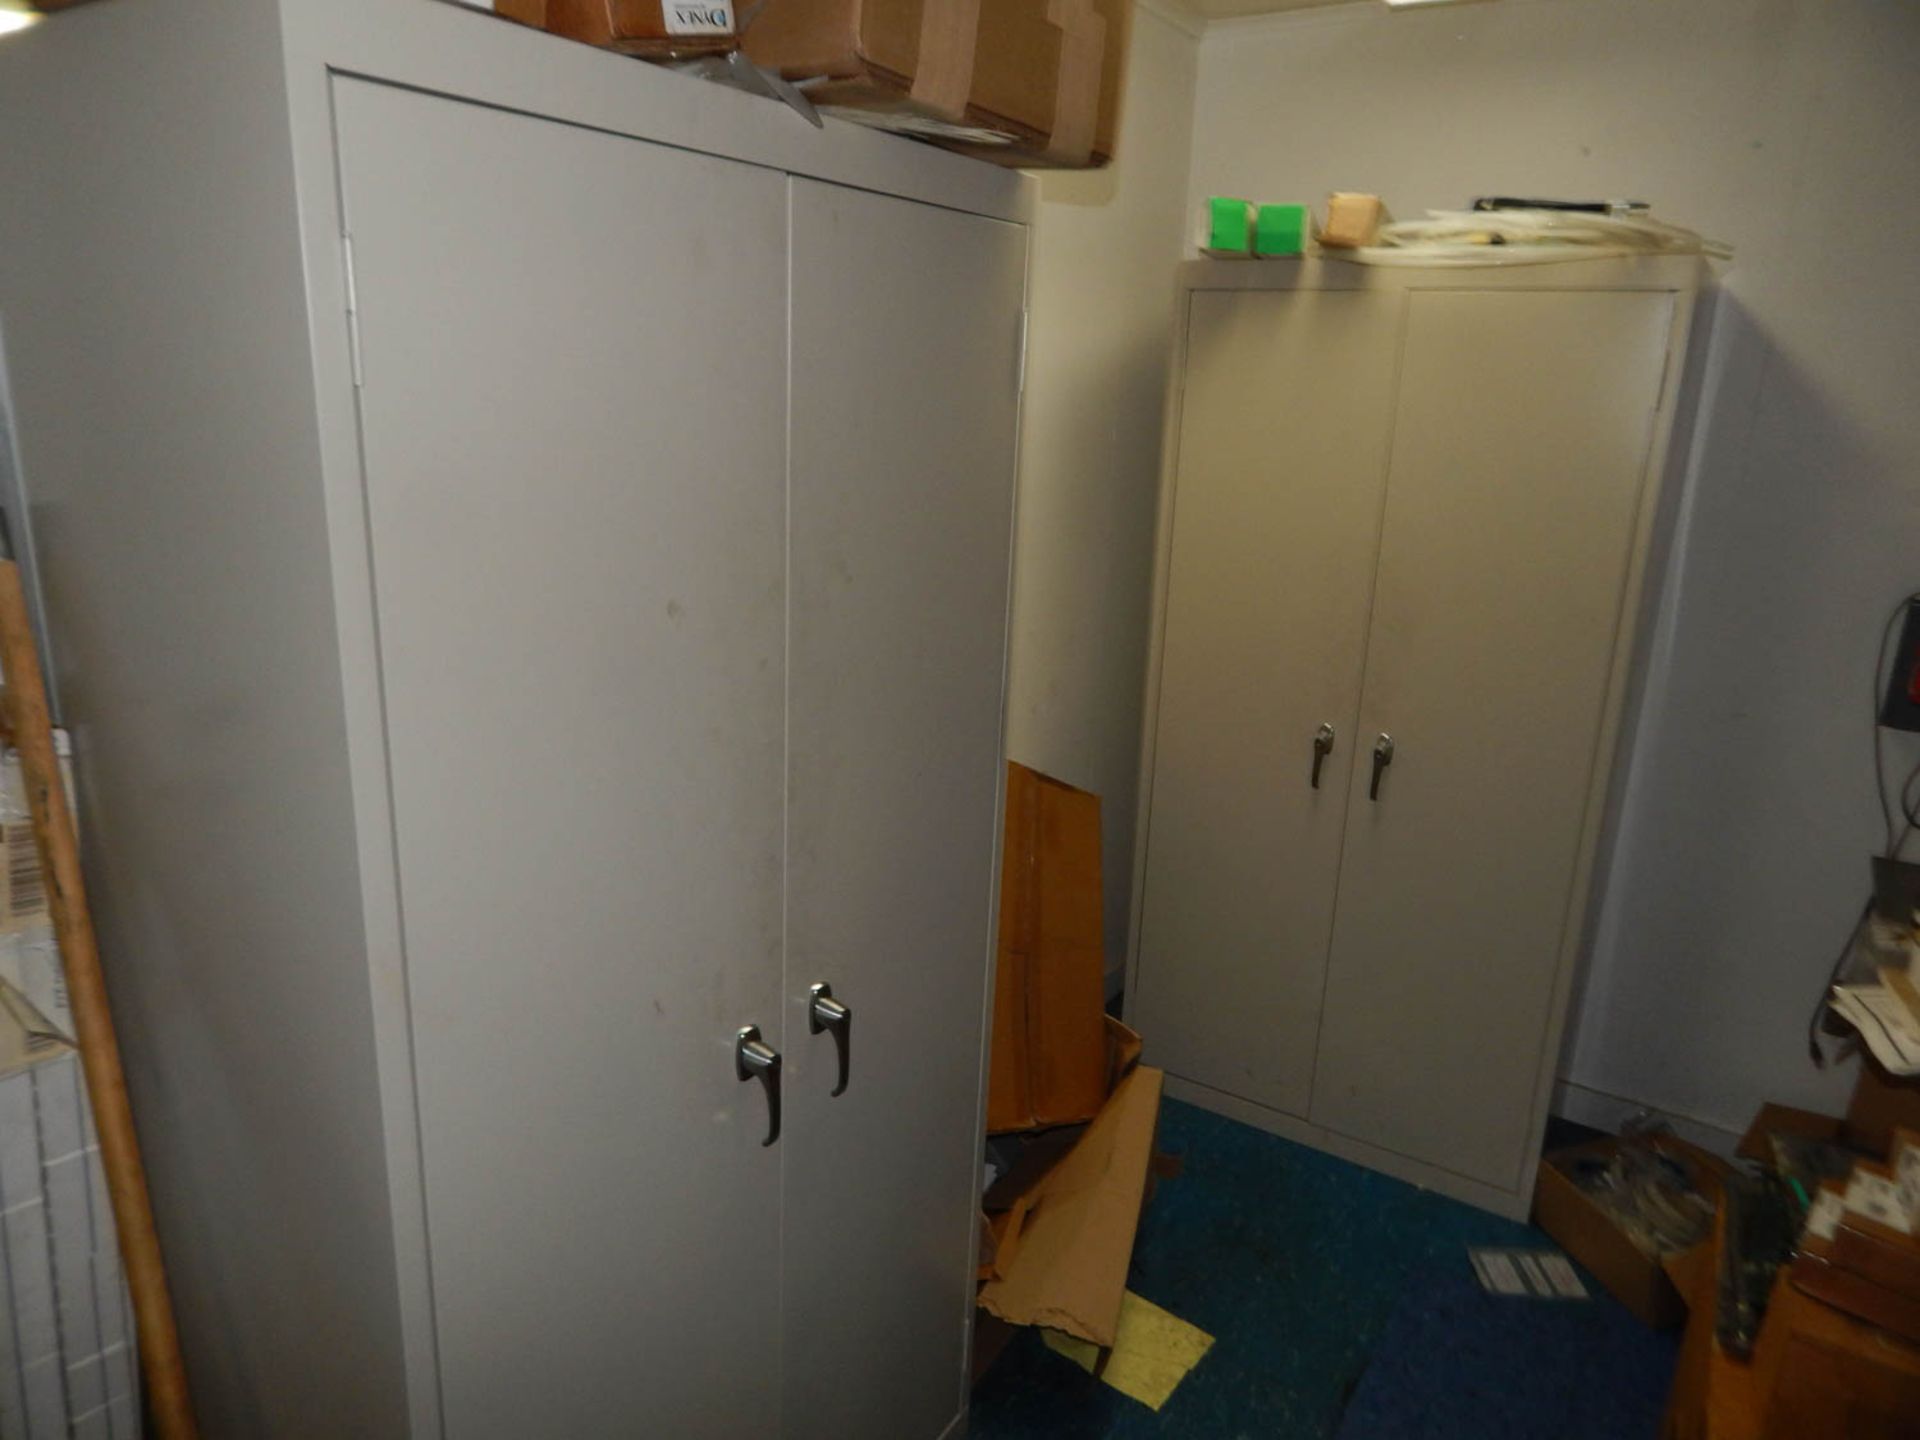 CONTENTS OF ROOM, INCLUDING: SHELVES, FITTINGS, CABINETS, ETC. - Image 3 of 3